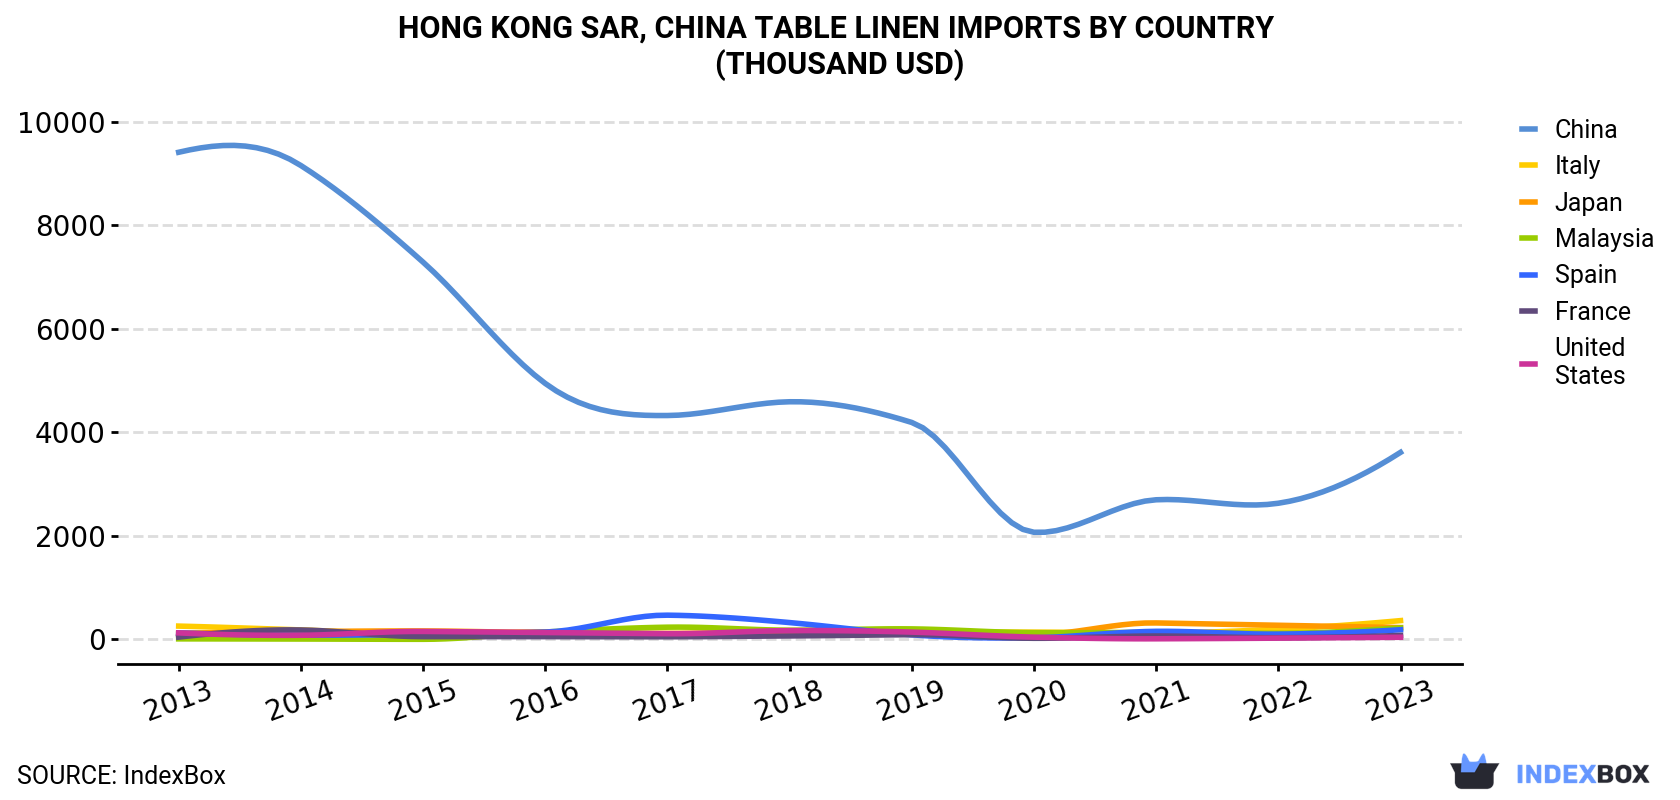 Hong Kong Table Linen Imports By Country (Thousand USD)